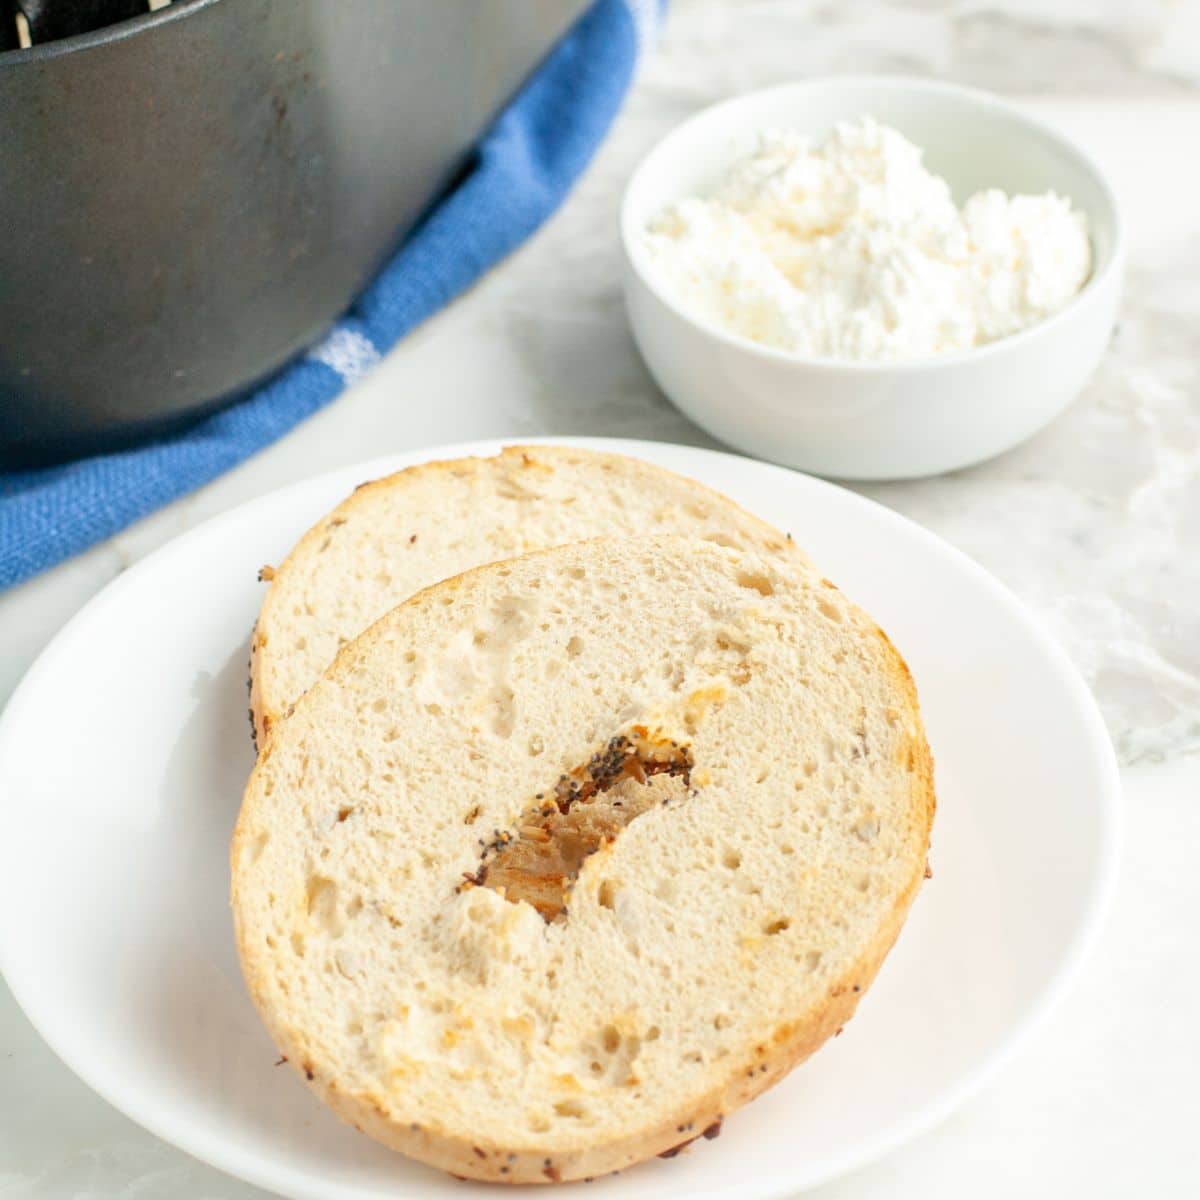 Toasted bagel on a plate with a bowl of cream cheese.